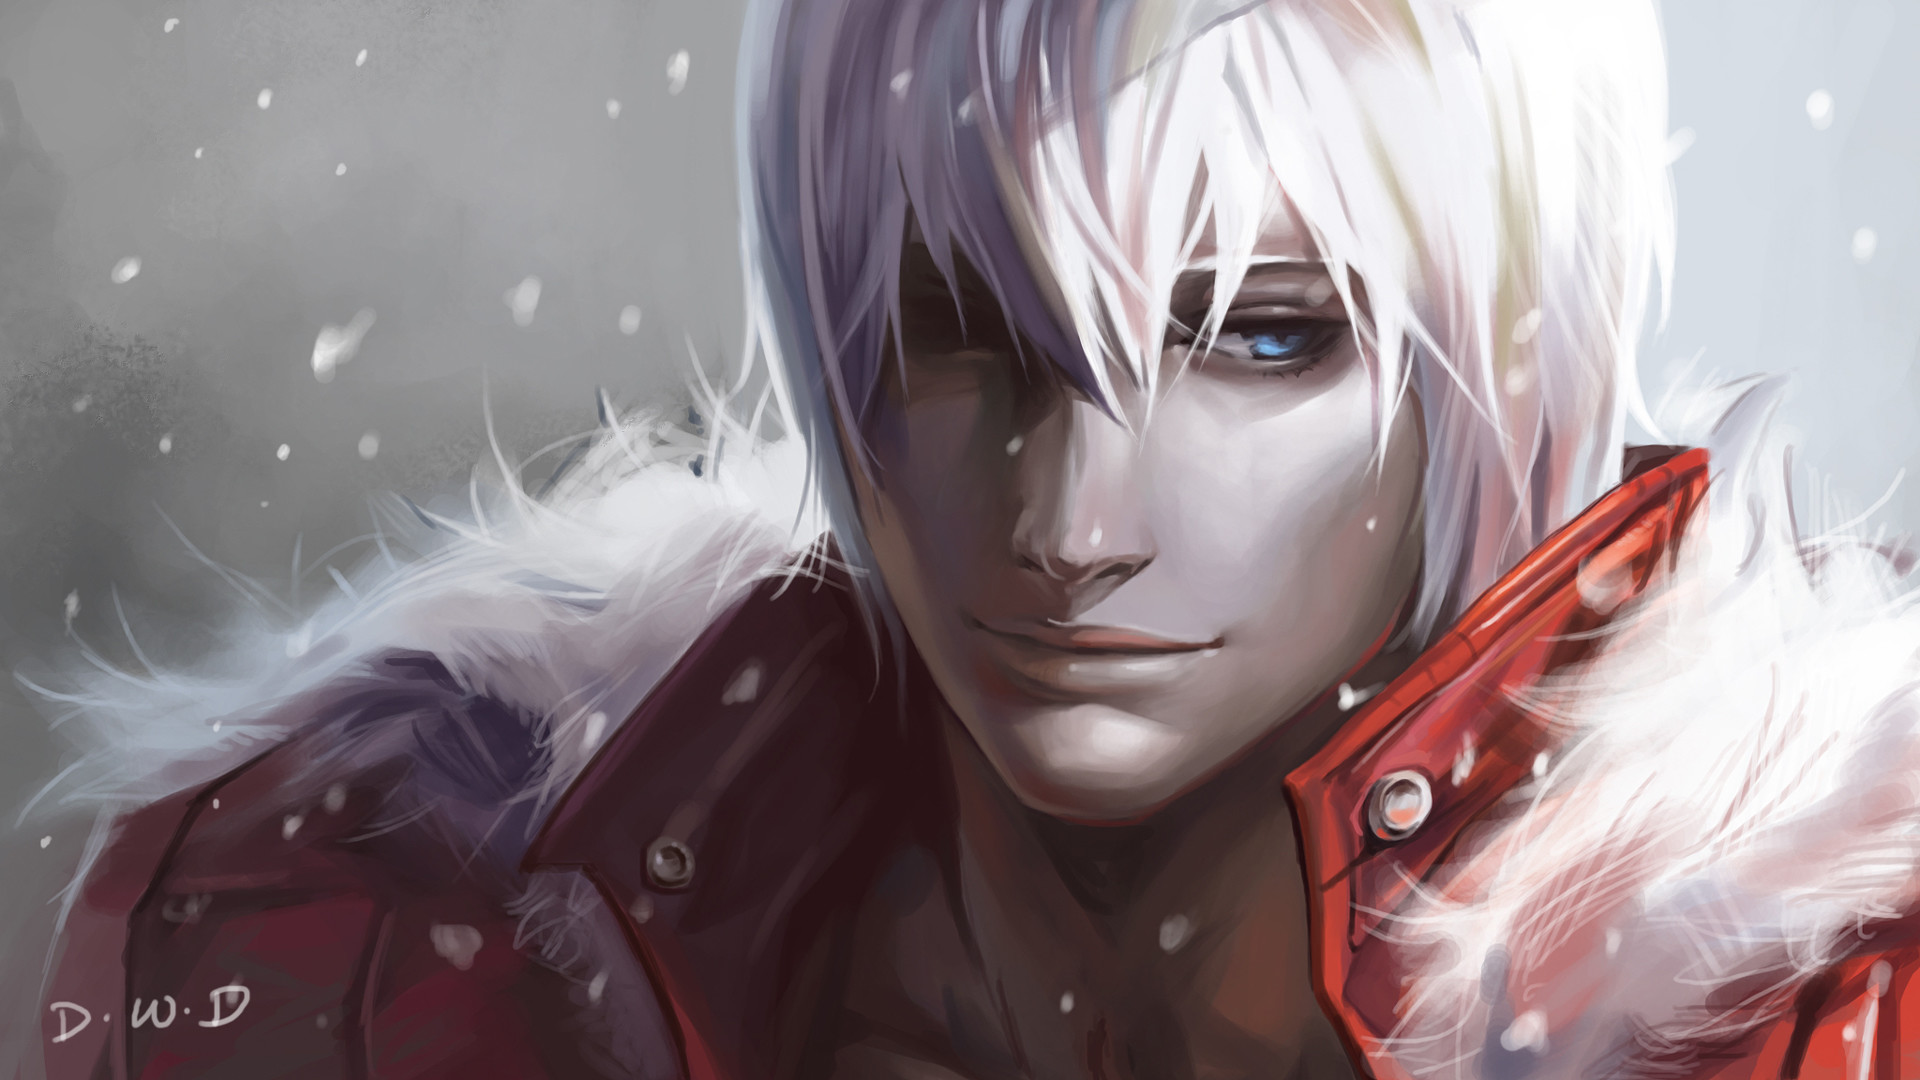 1920x1080 ... download Dante (Devil May Cry) image